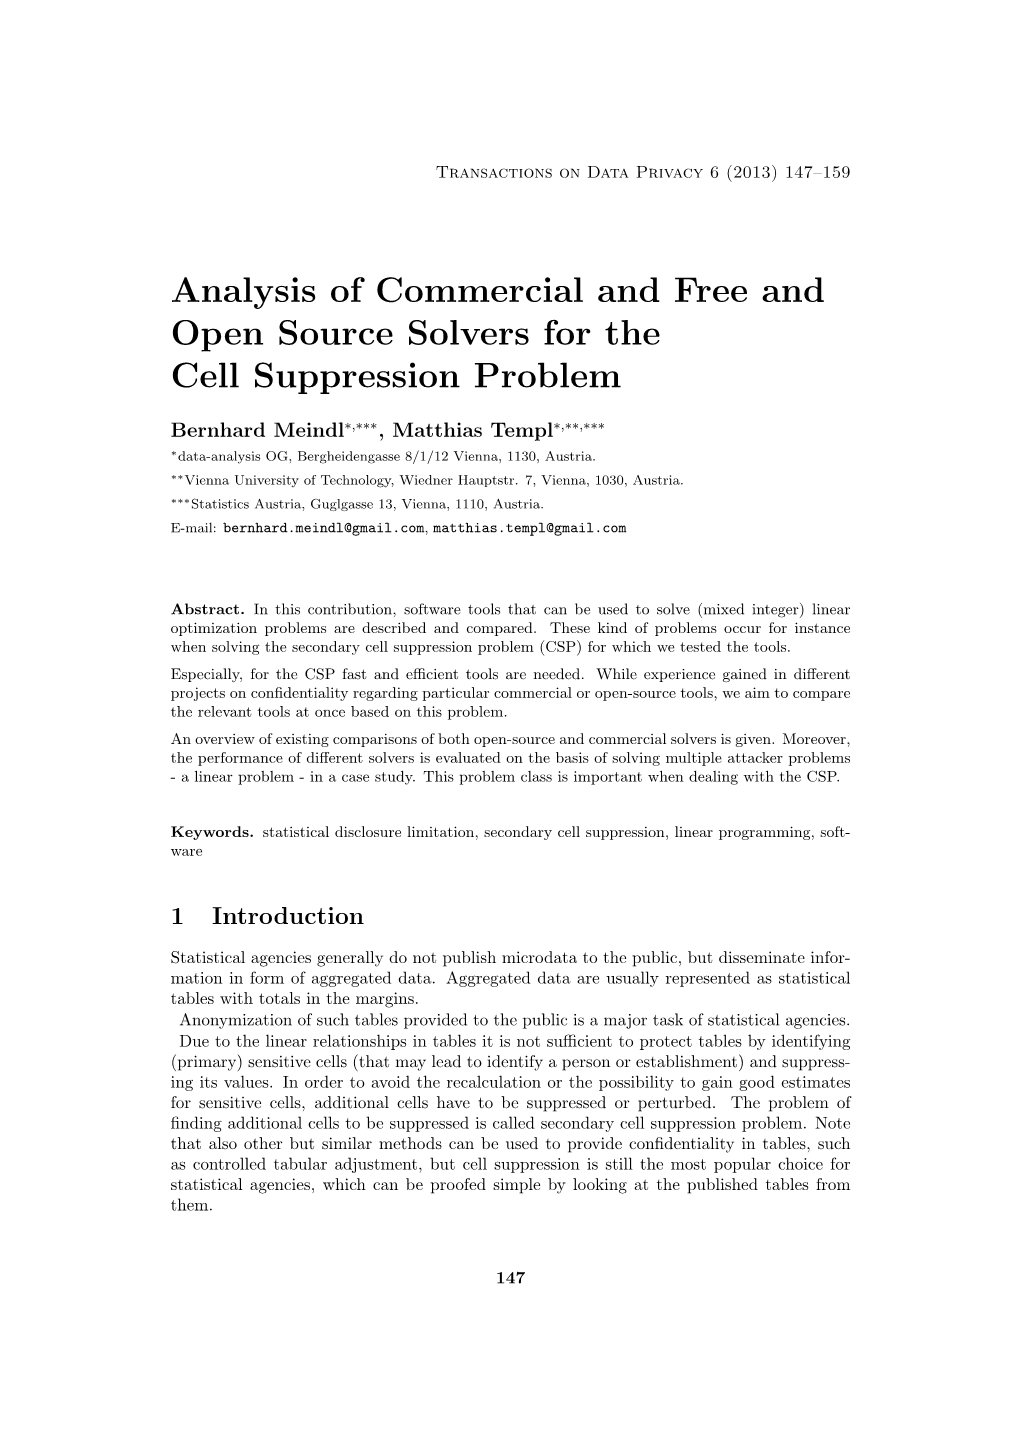 Analysis of Commercial and Free and Open Source Solvers for the Cell Suppression Problem